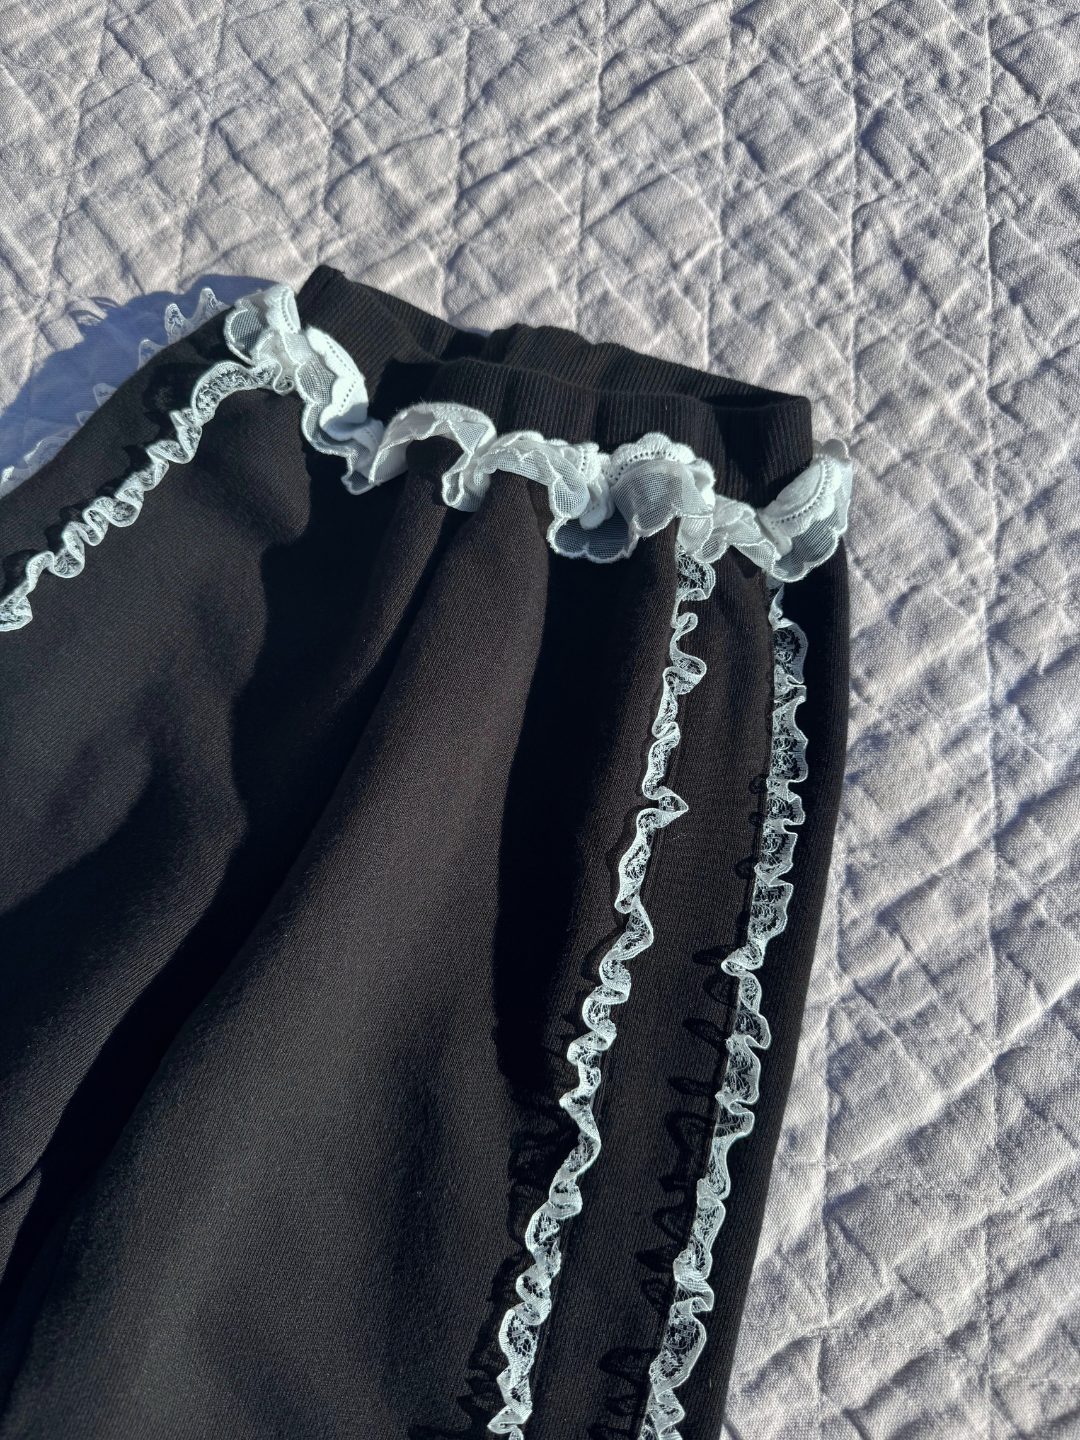 A close up on the ruffle detail of the Relay pant